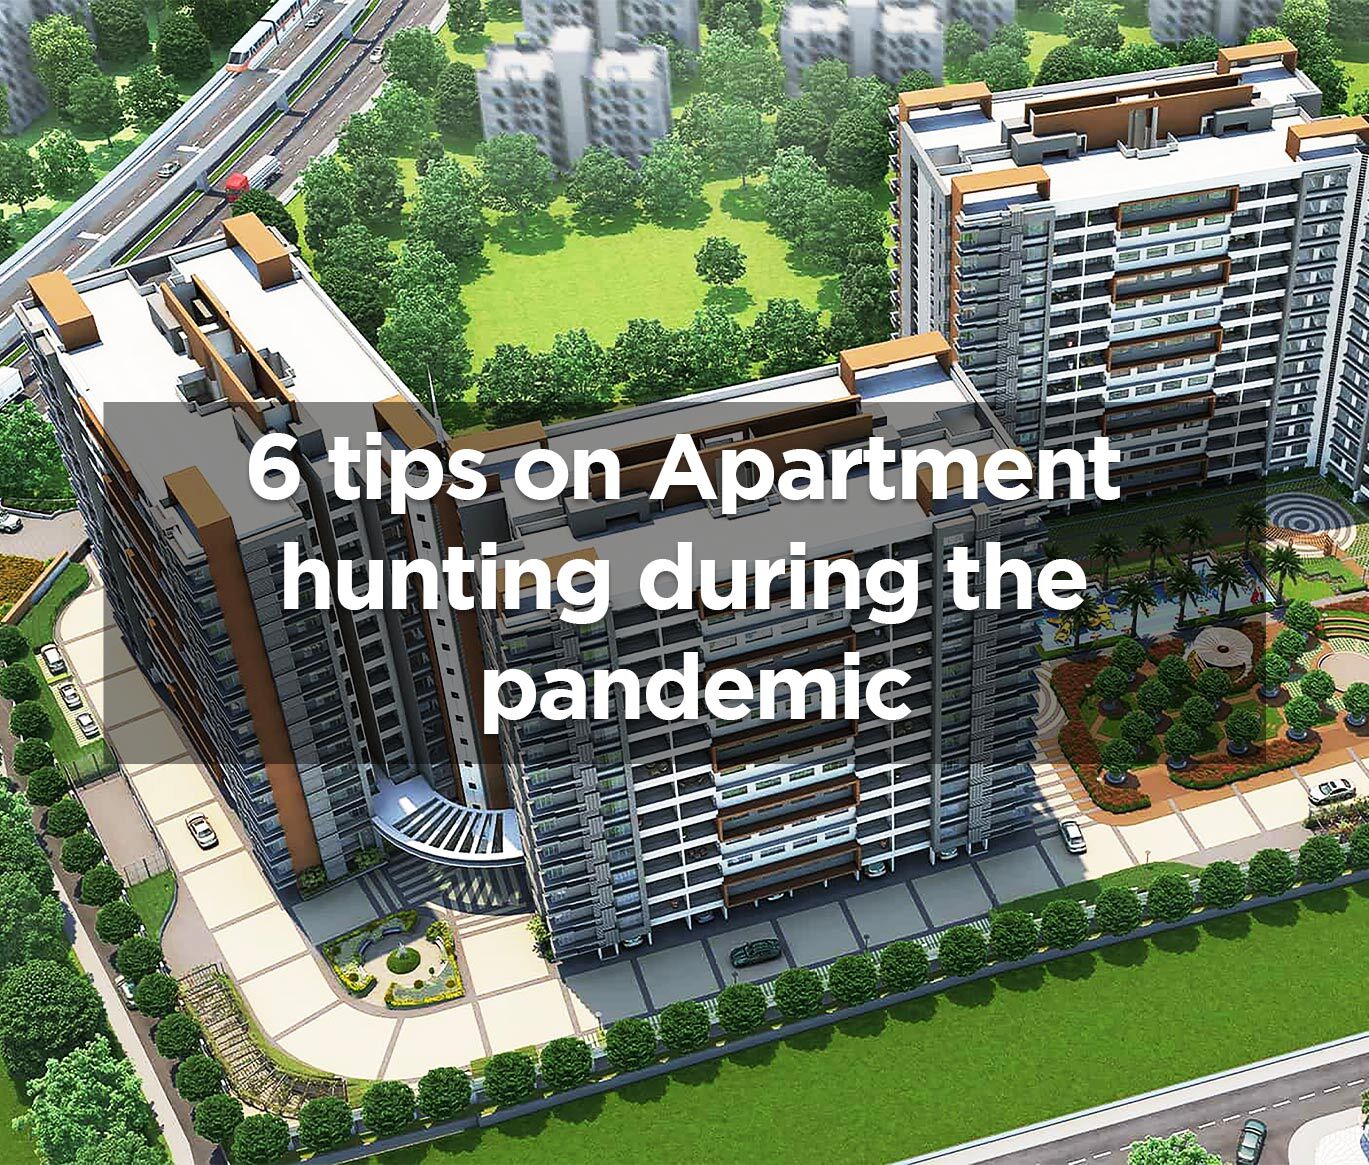 6 tips on Apartment hunting during the pandemic